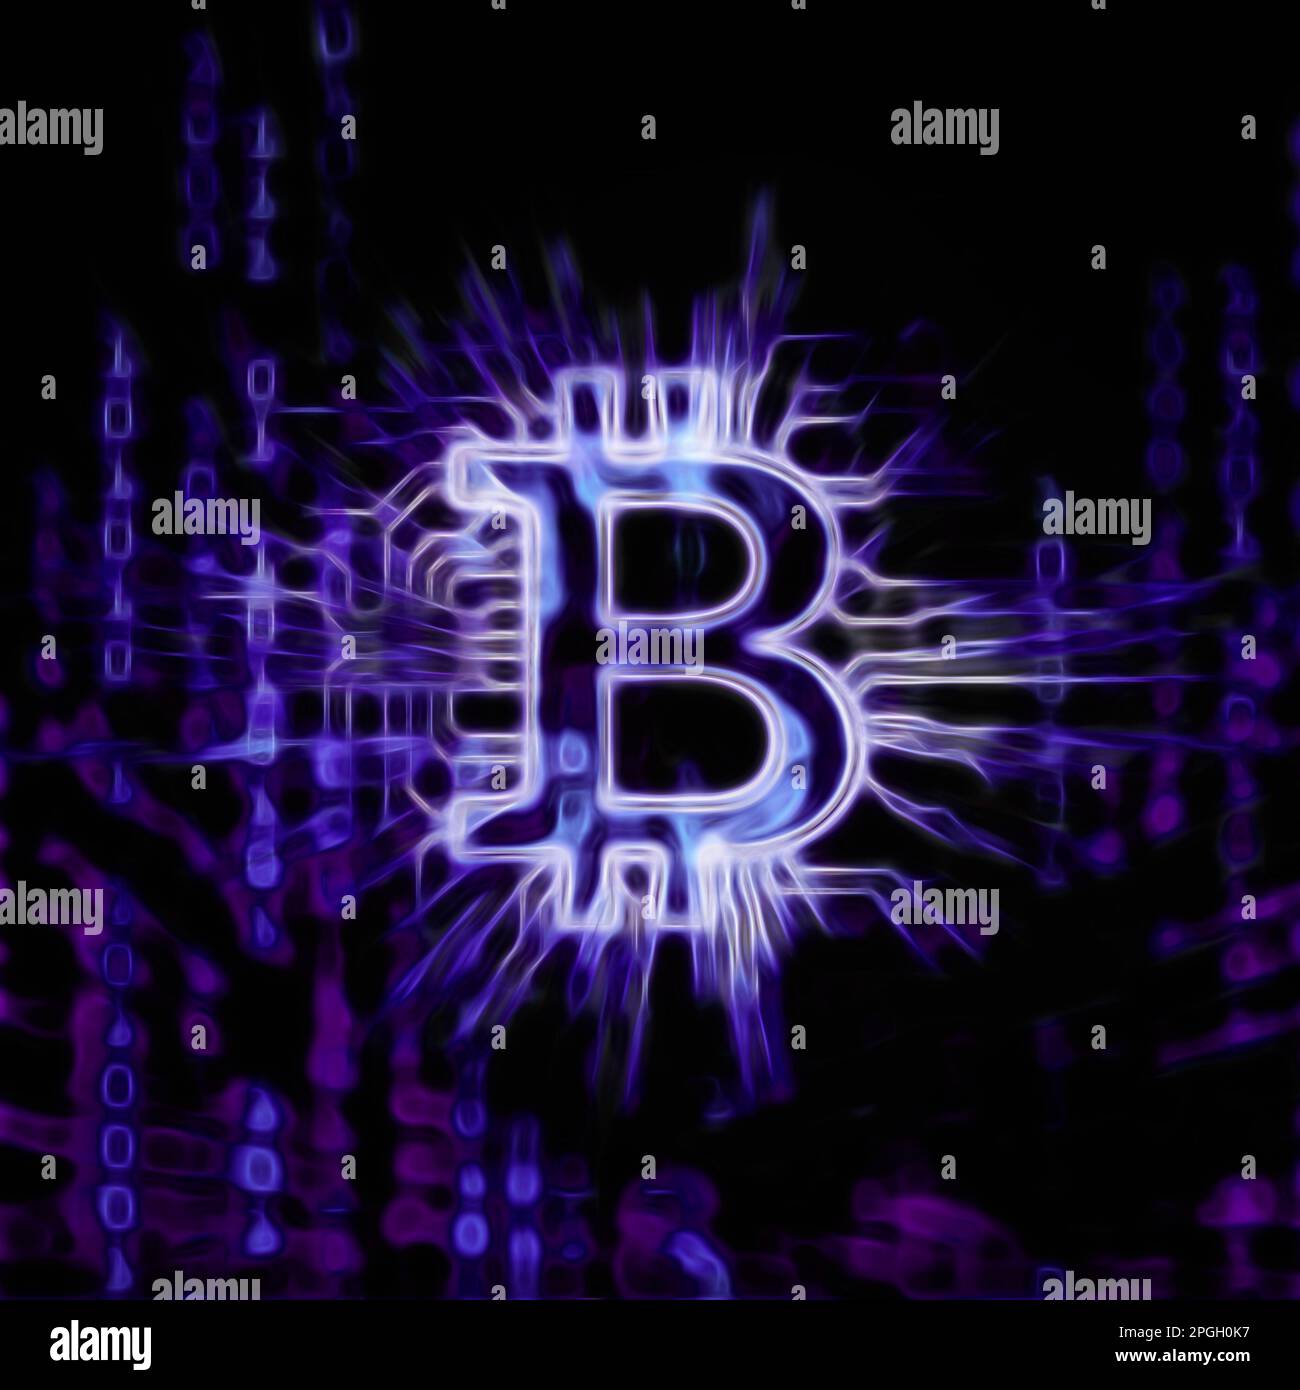 Bitcoin ₿ cryptocurrency, digital decentralized currency symbol. Conceptual dynamic fractal illustration of a bitcoin connected to a blockchain networ Stock Photo